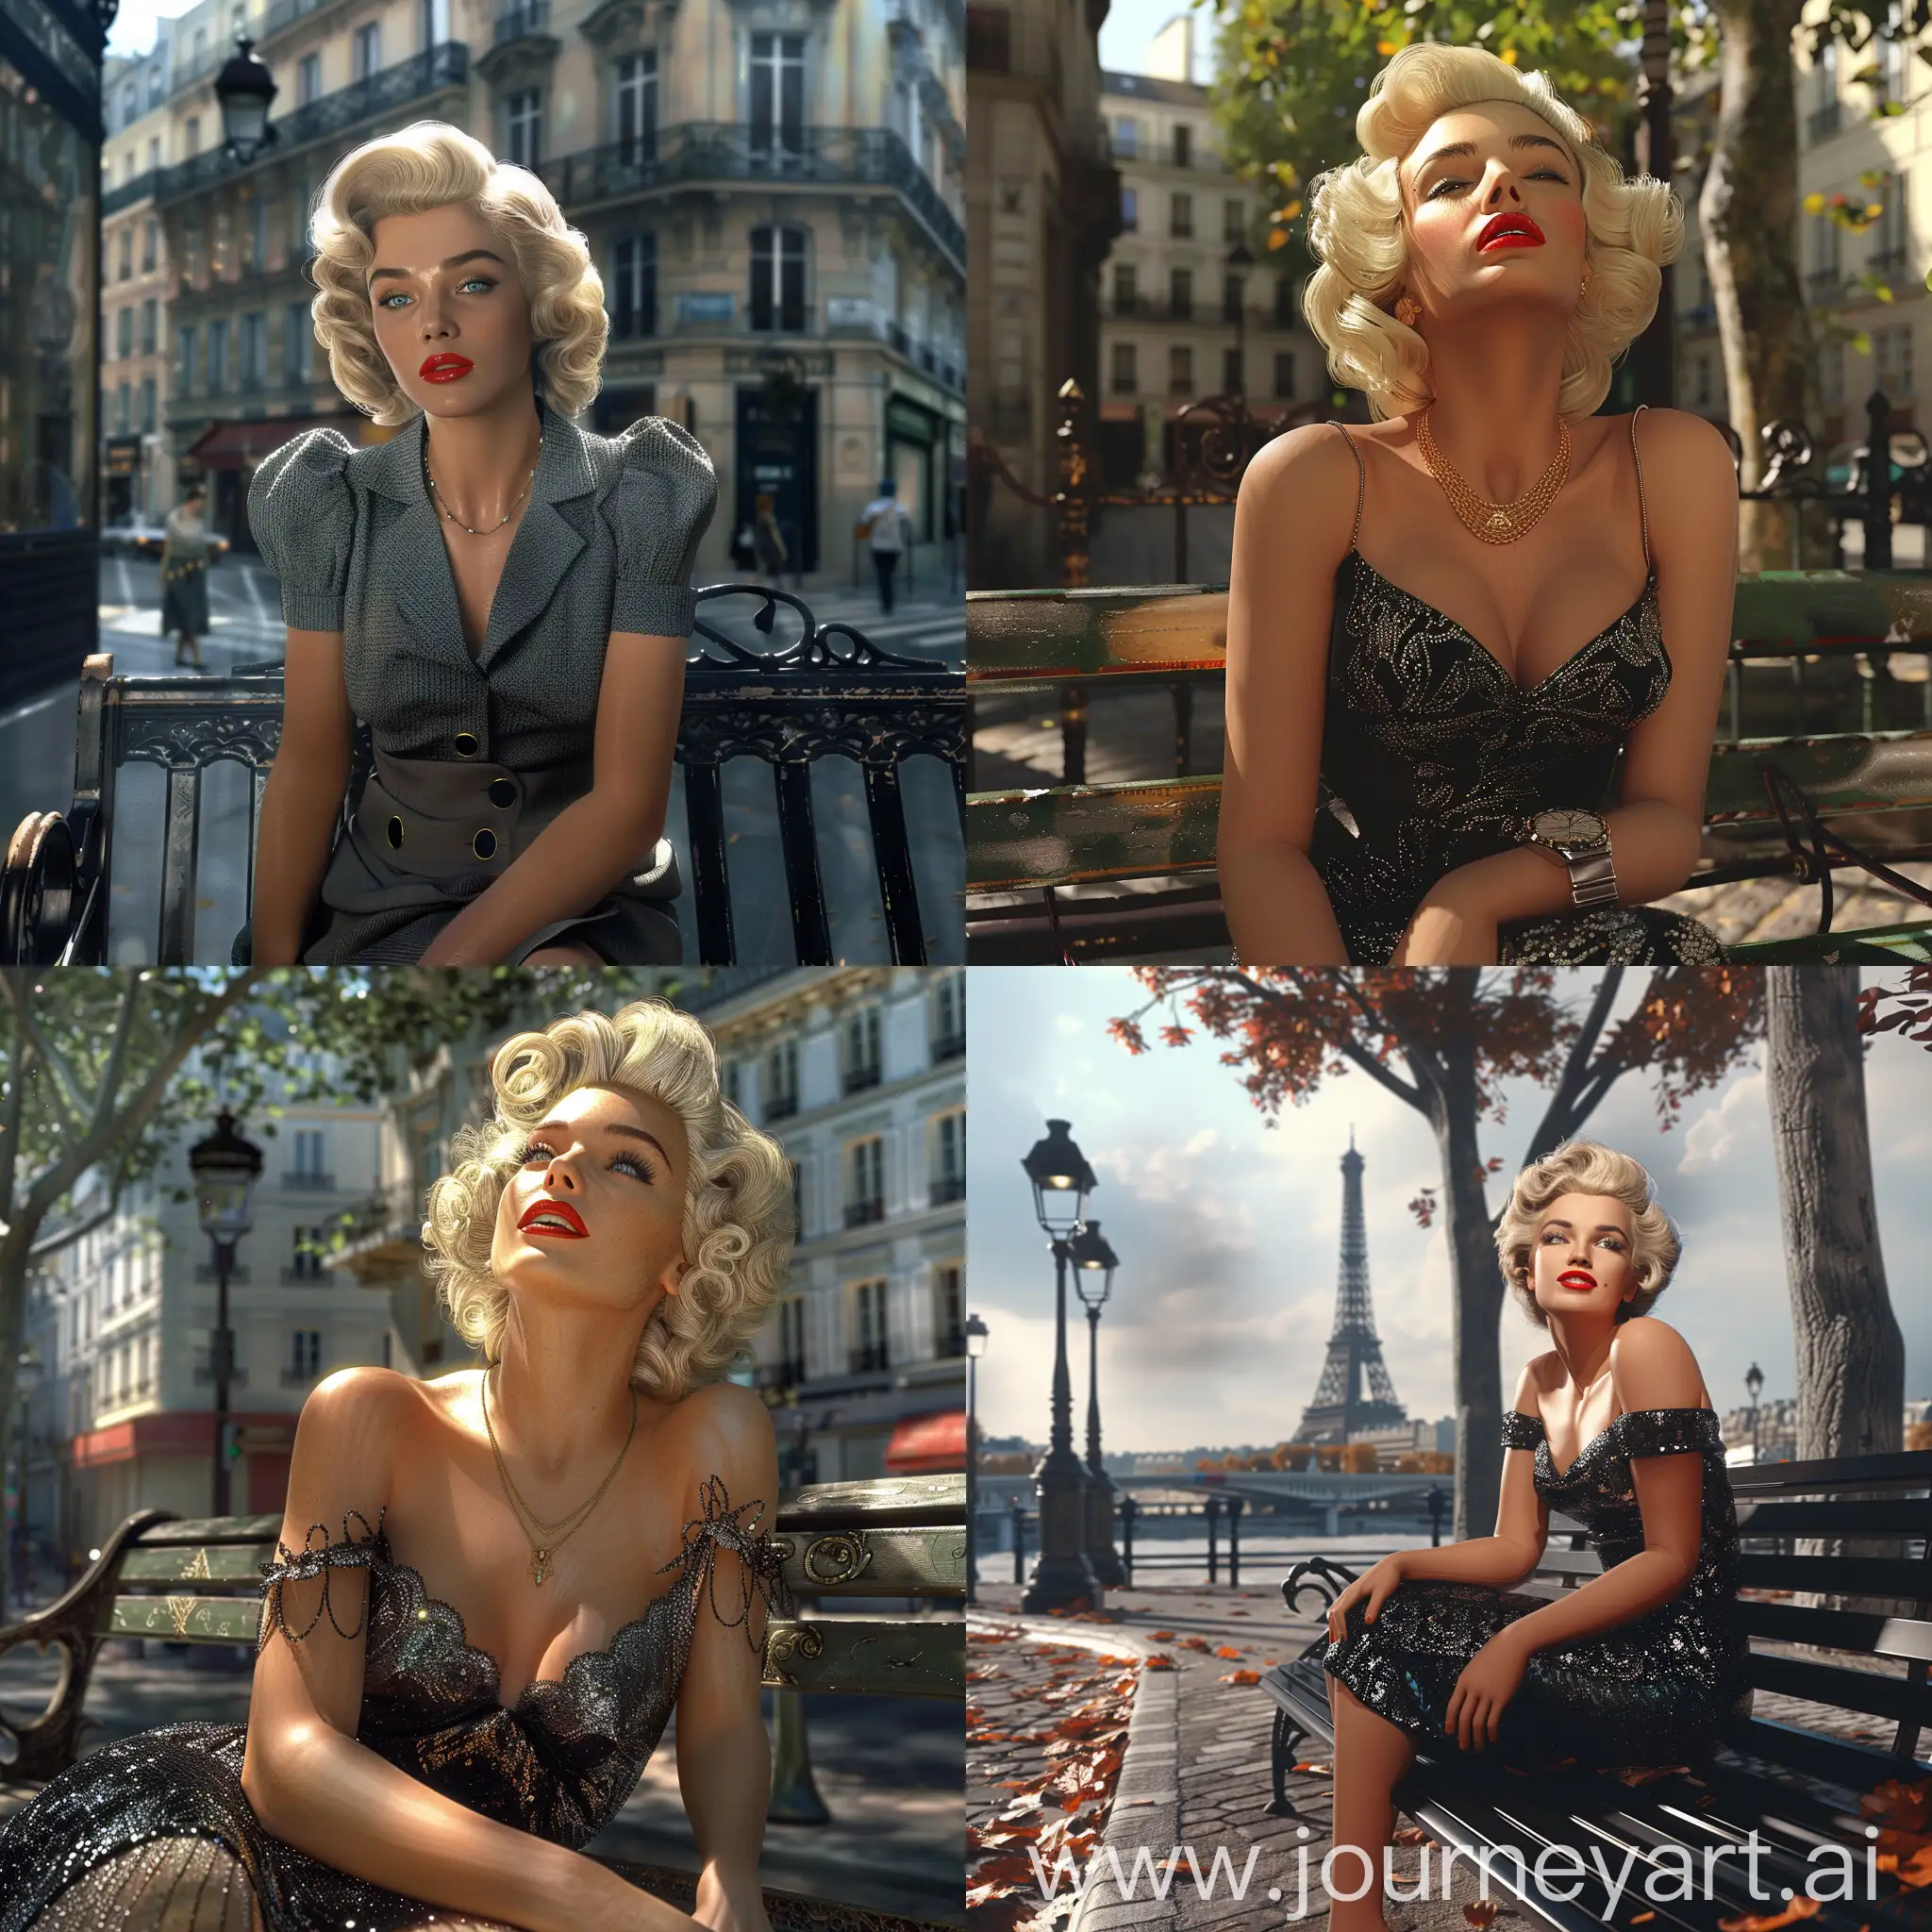 Marilyn-Monroe-Sitting-on-a-Parisian-Bench-Photorealistic-Detailed-Portrait-in-8K-Resolution